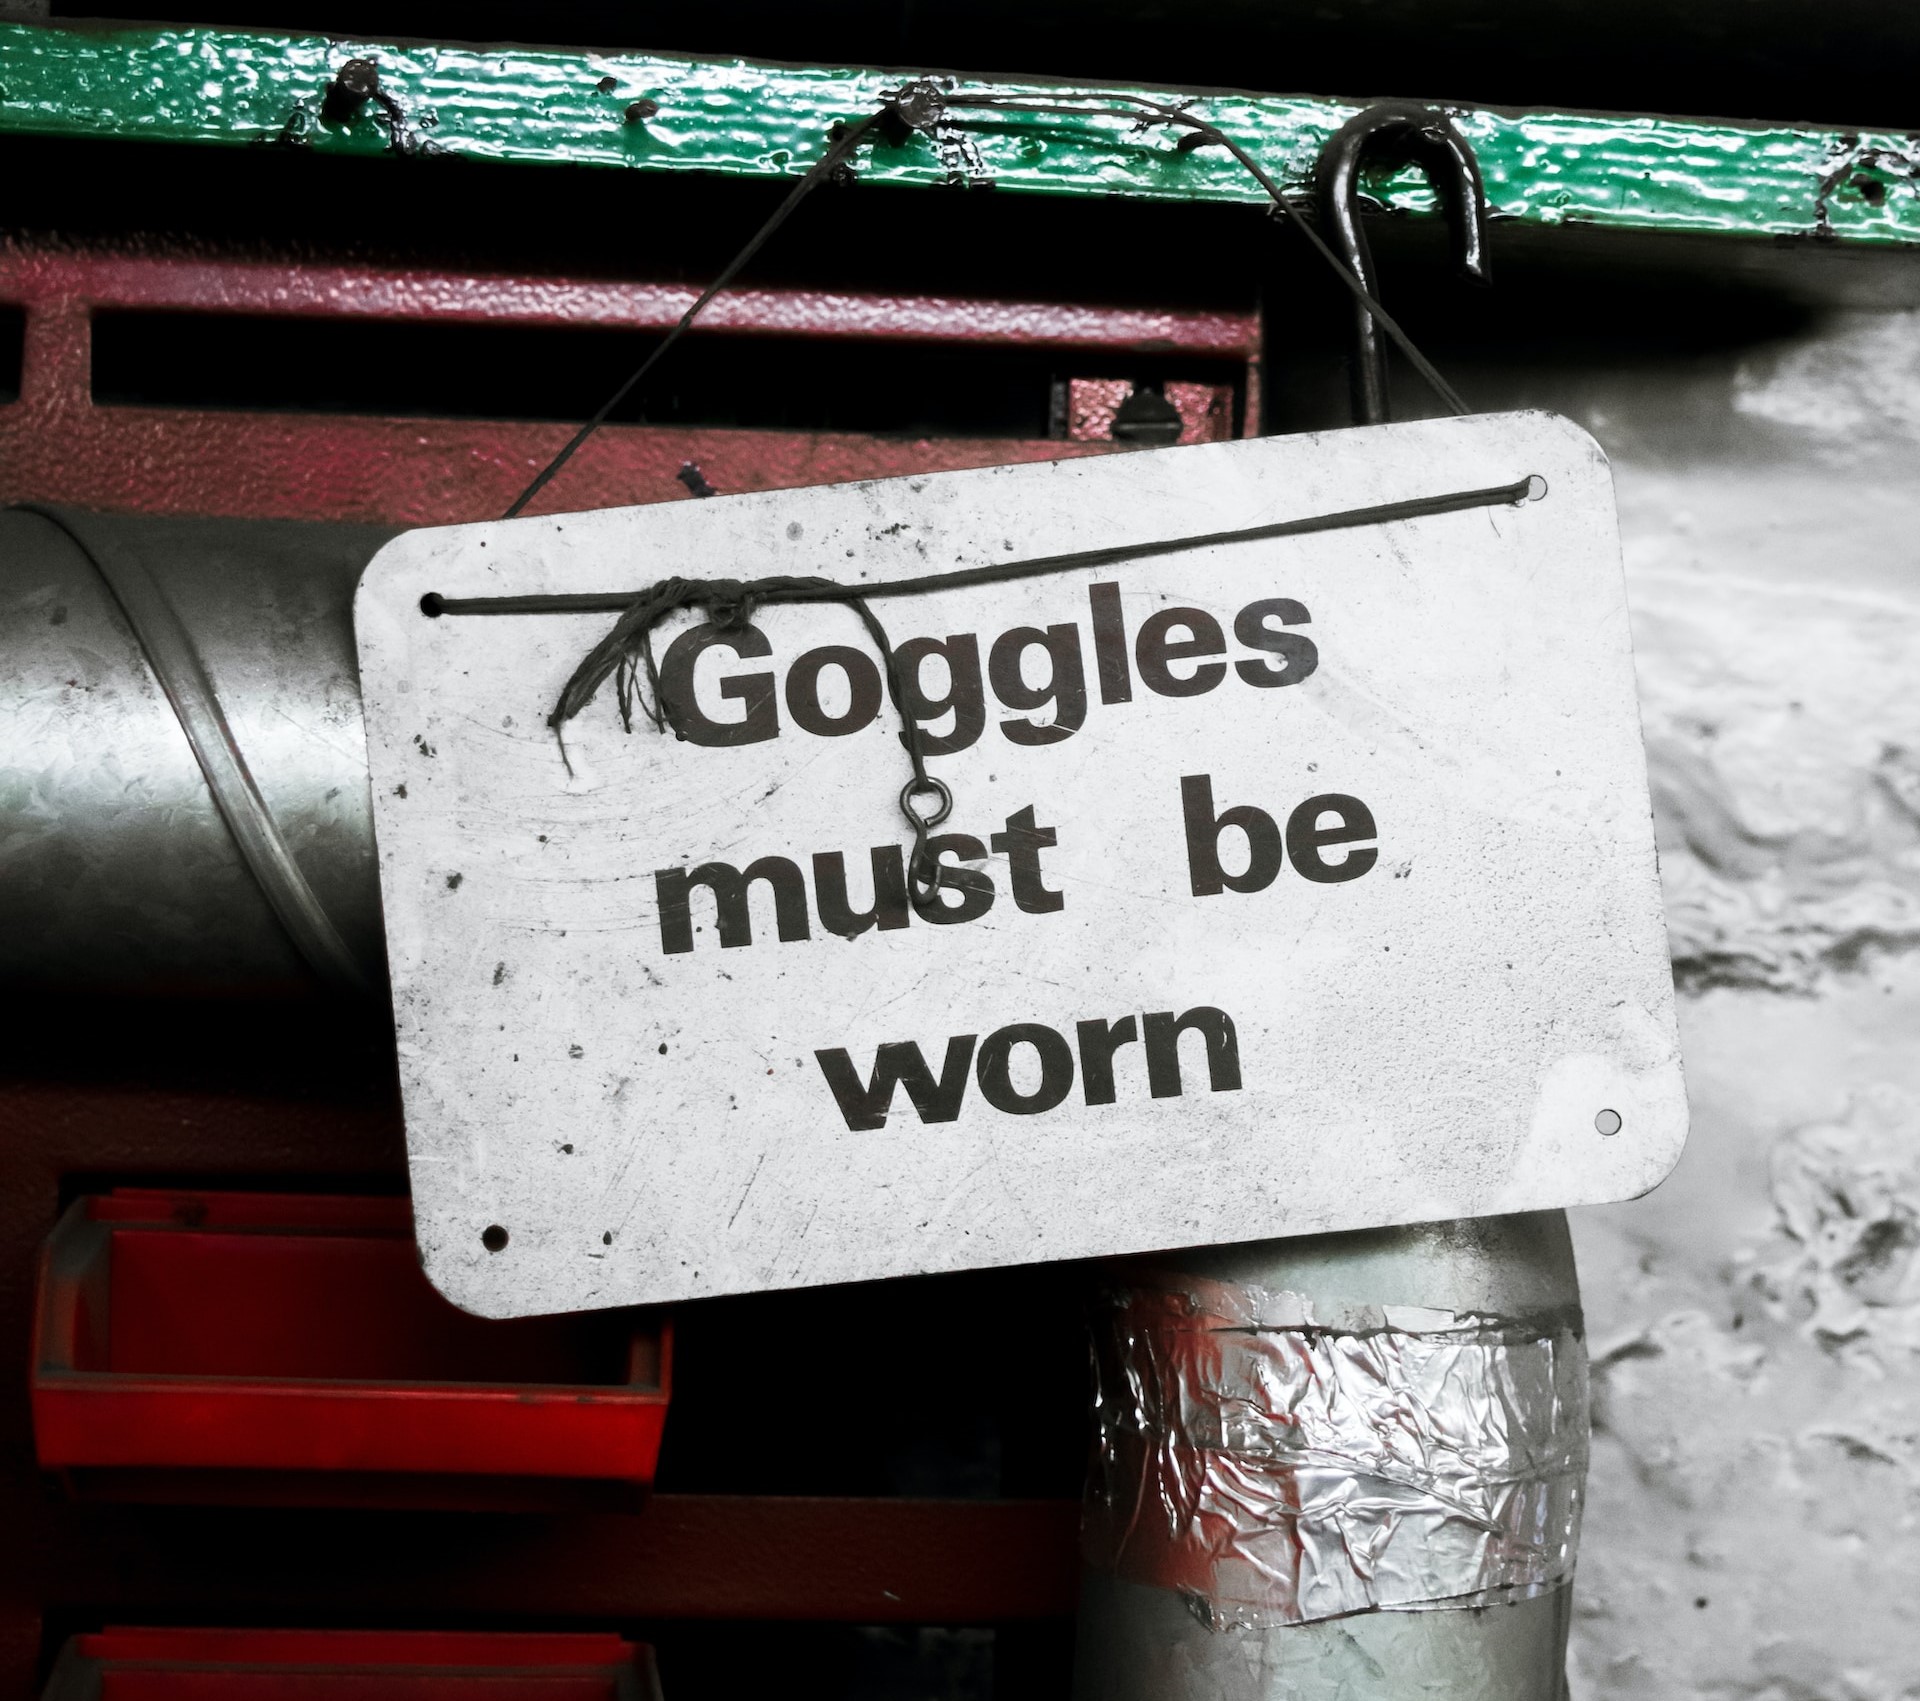 A 'goggles must be worn' sign